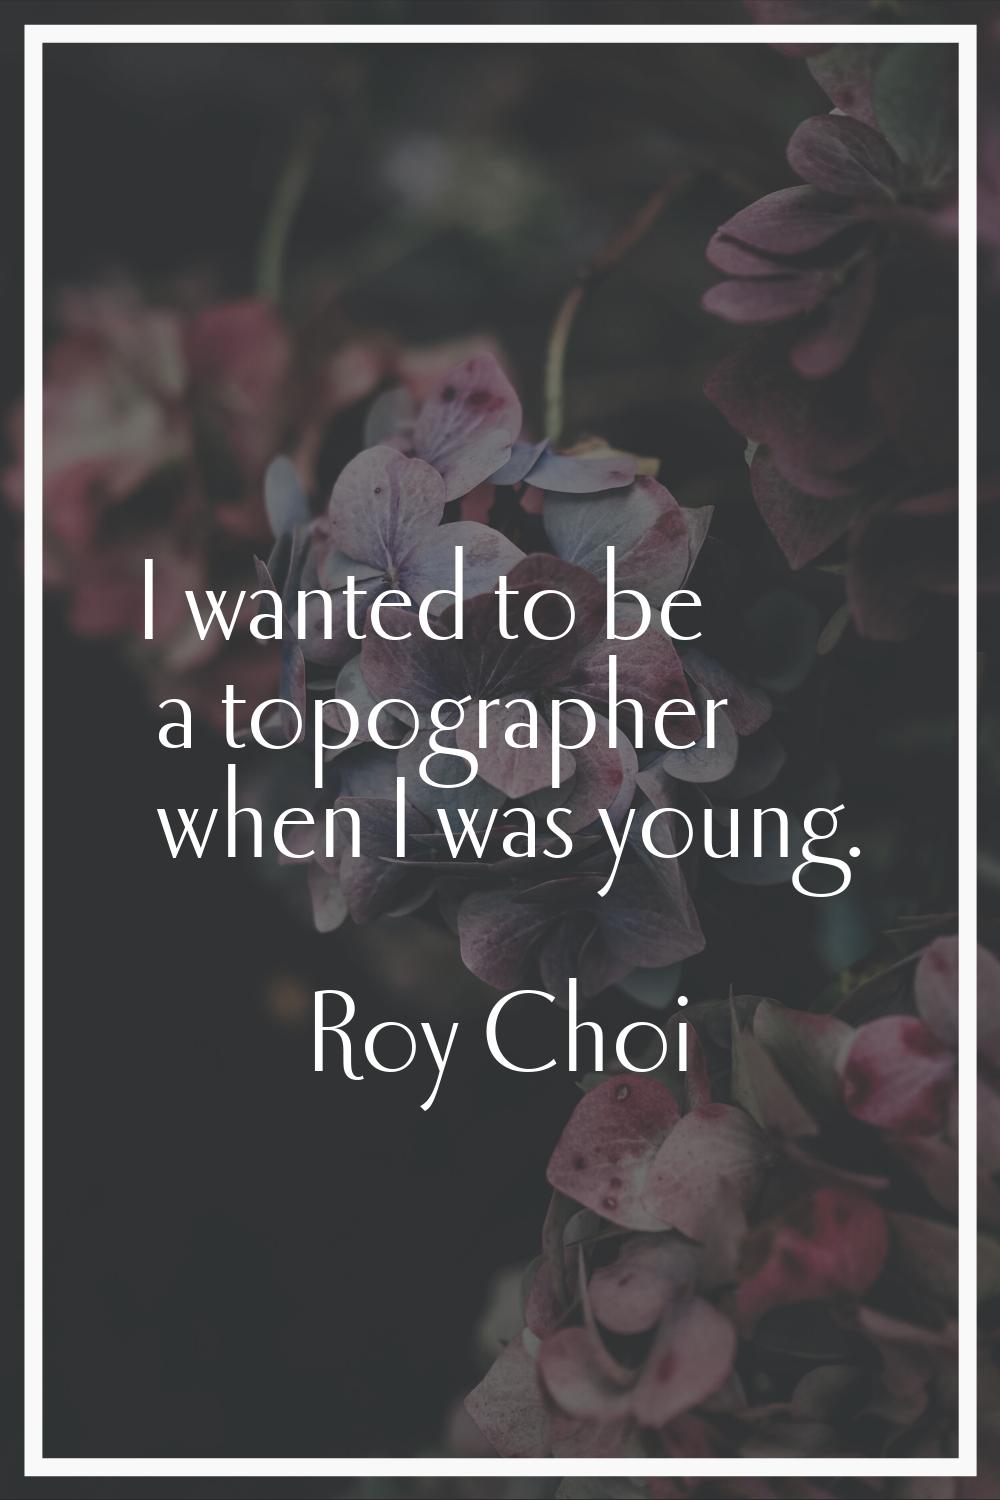 I wanted to be a topographer when I was young.